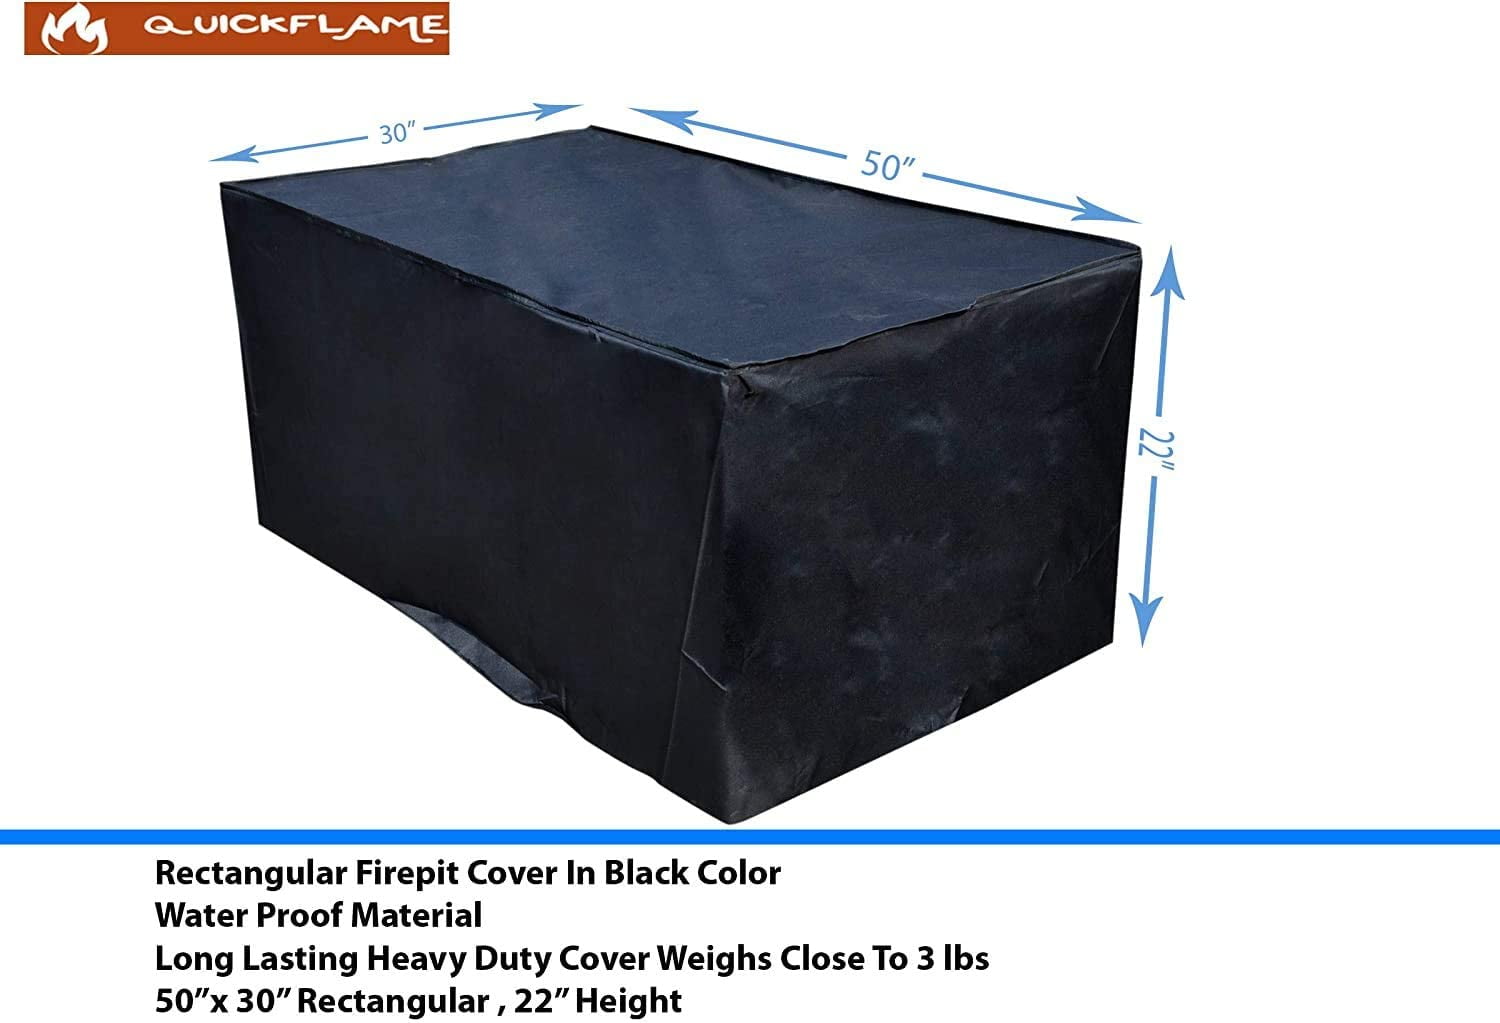 33 Inch Square Gas Firepit Cover, 50 Fire Pit Cover